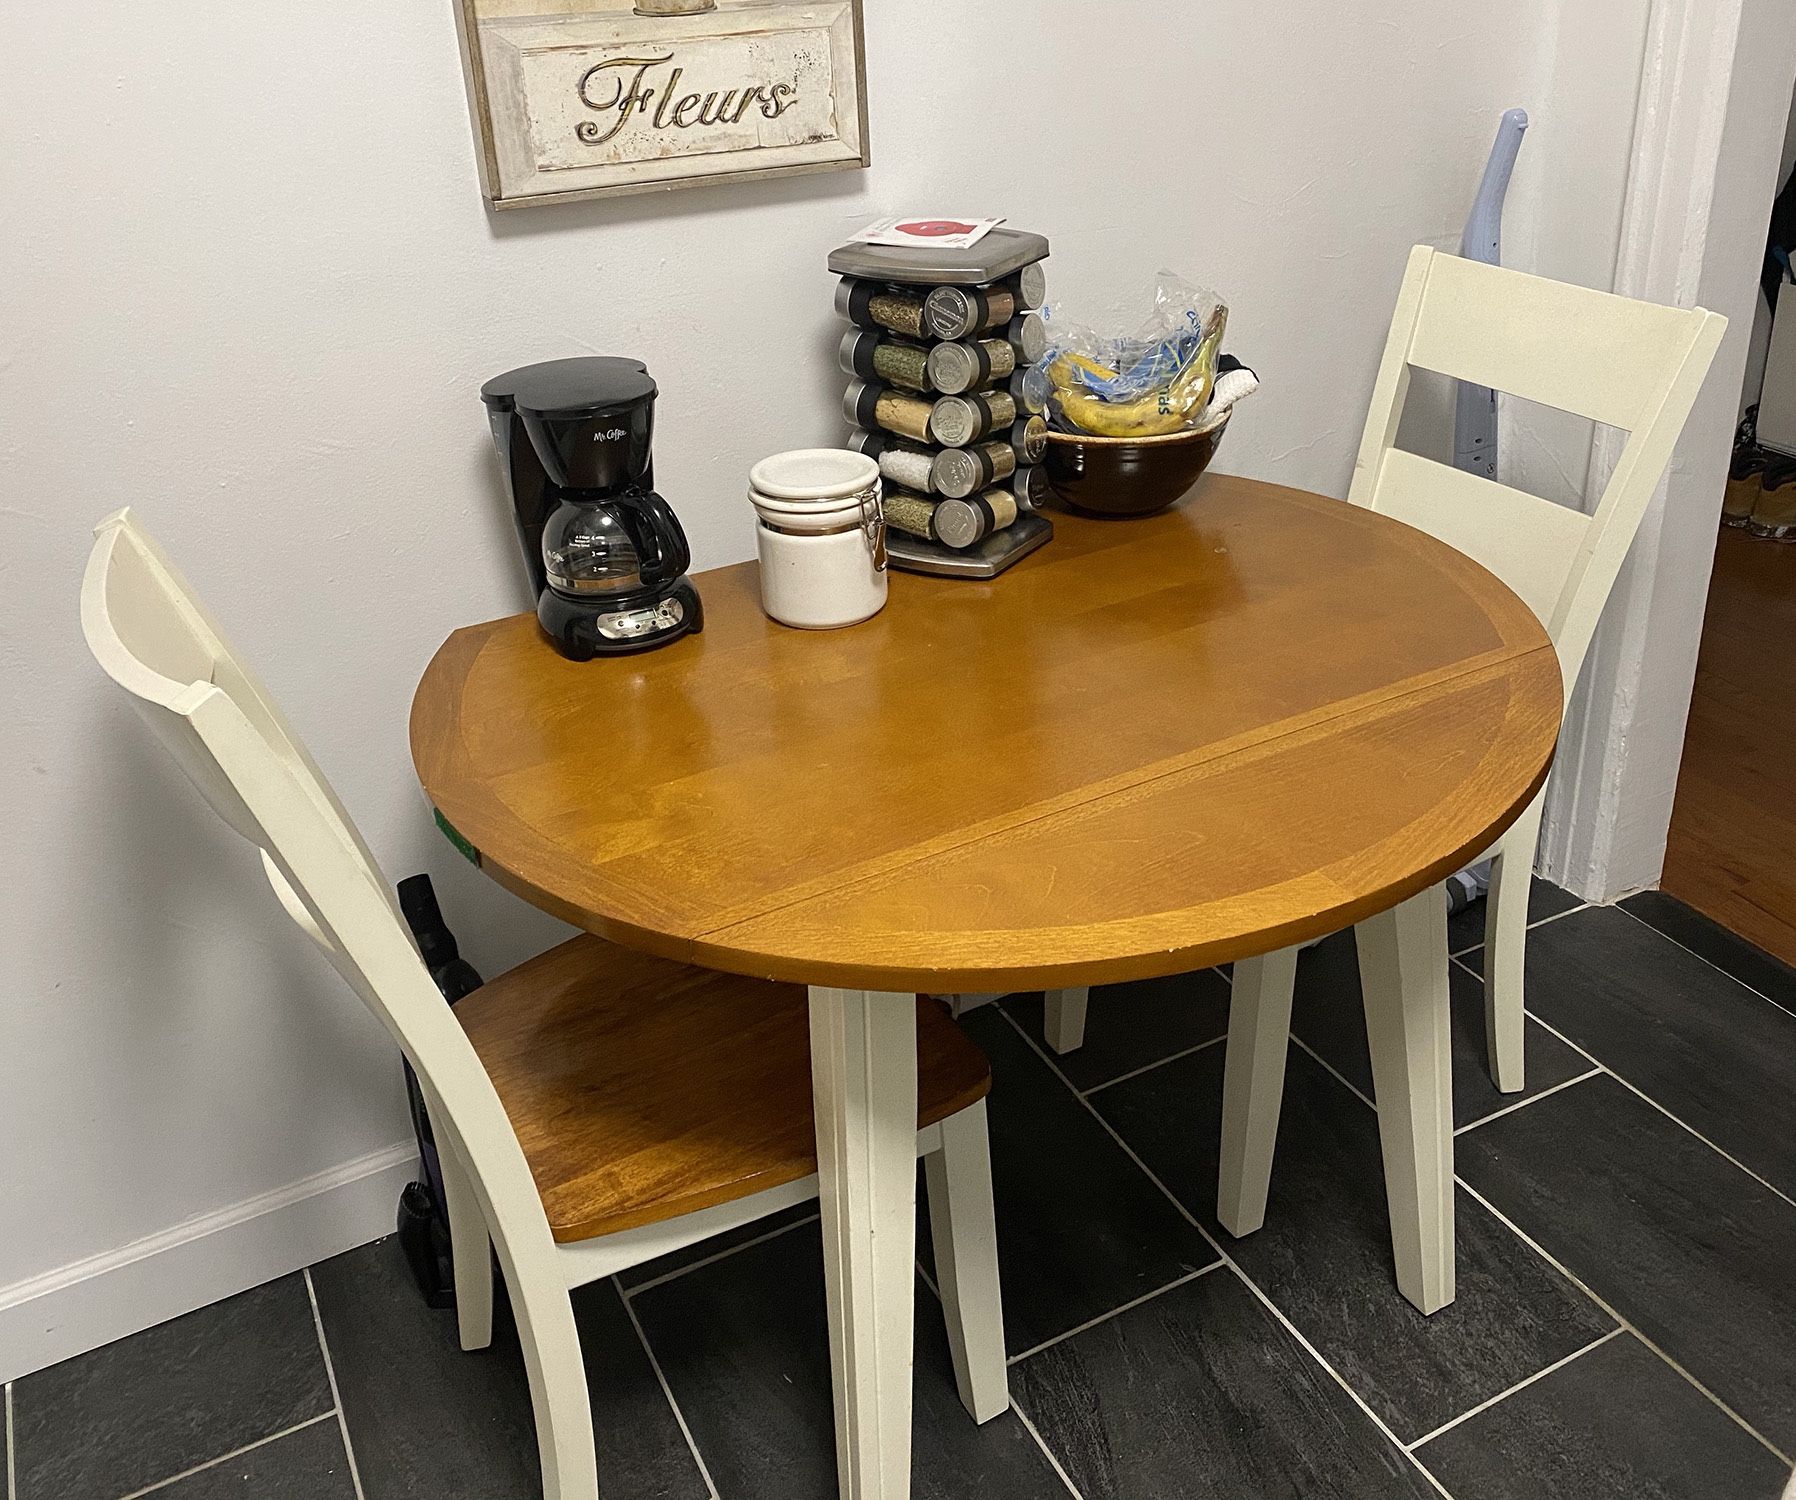 Table with 2 chairs - perfect for small spaces!